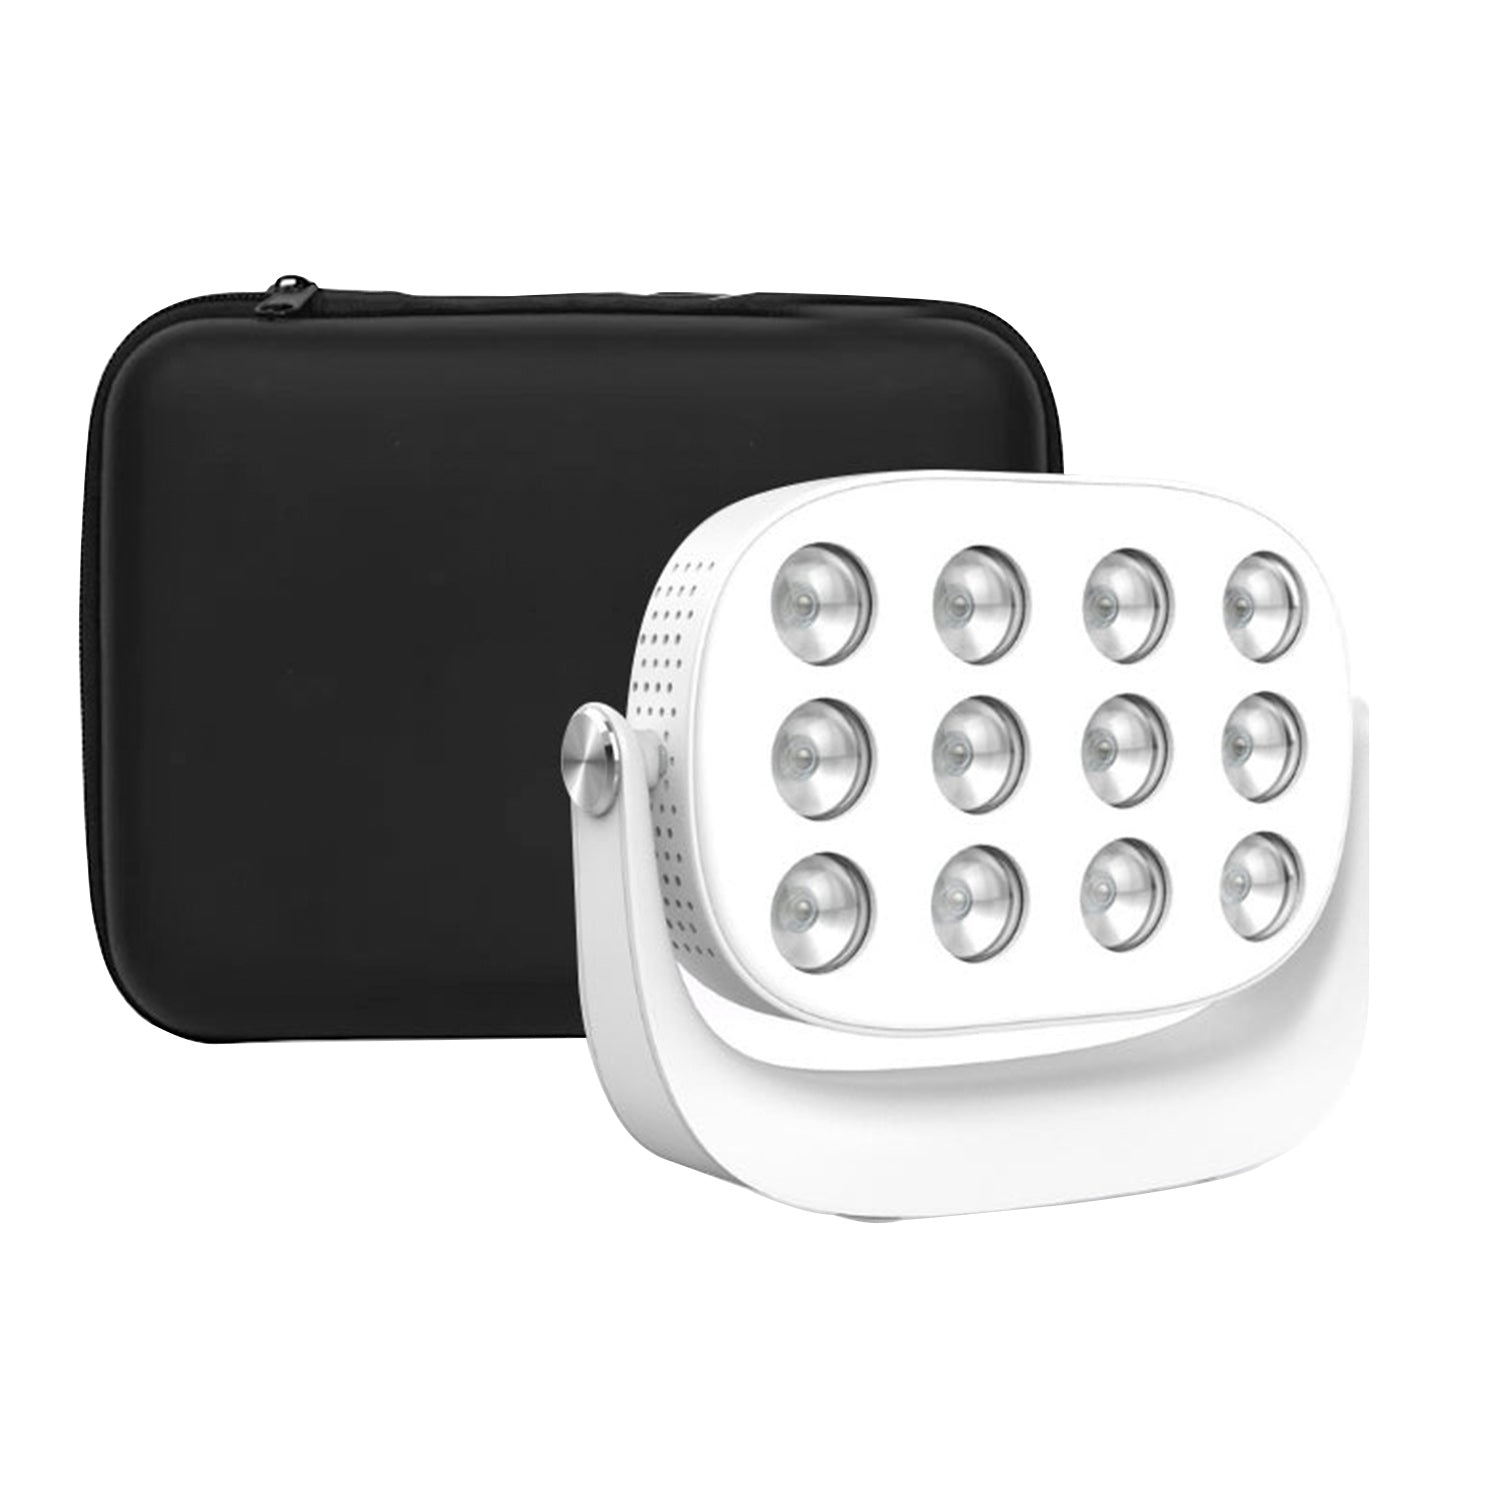 Megelin Portable Red Light Therapy Device